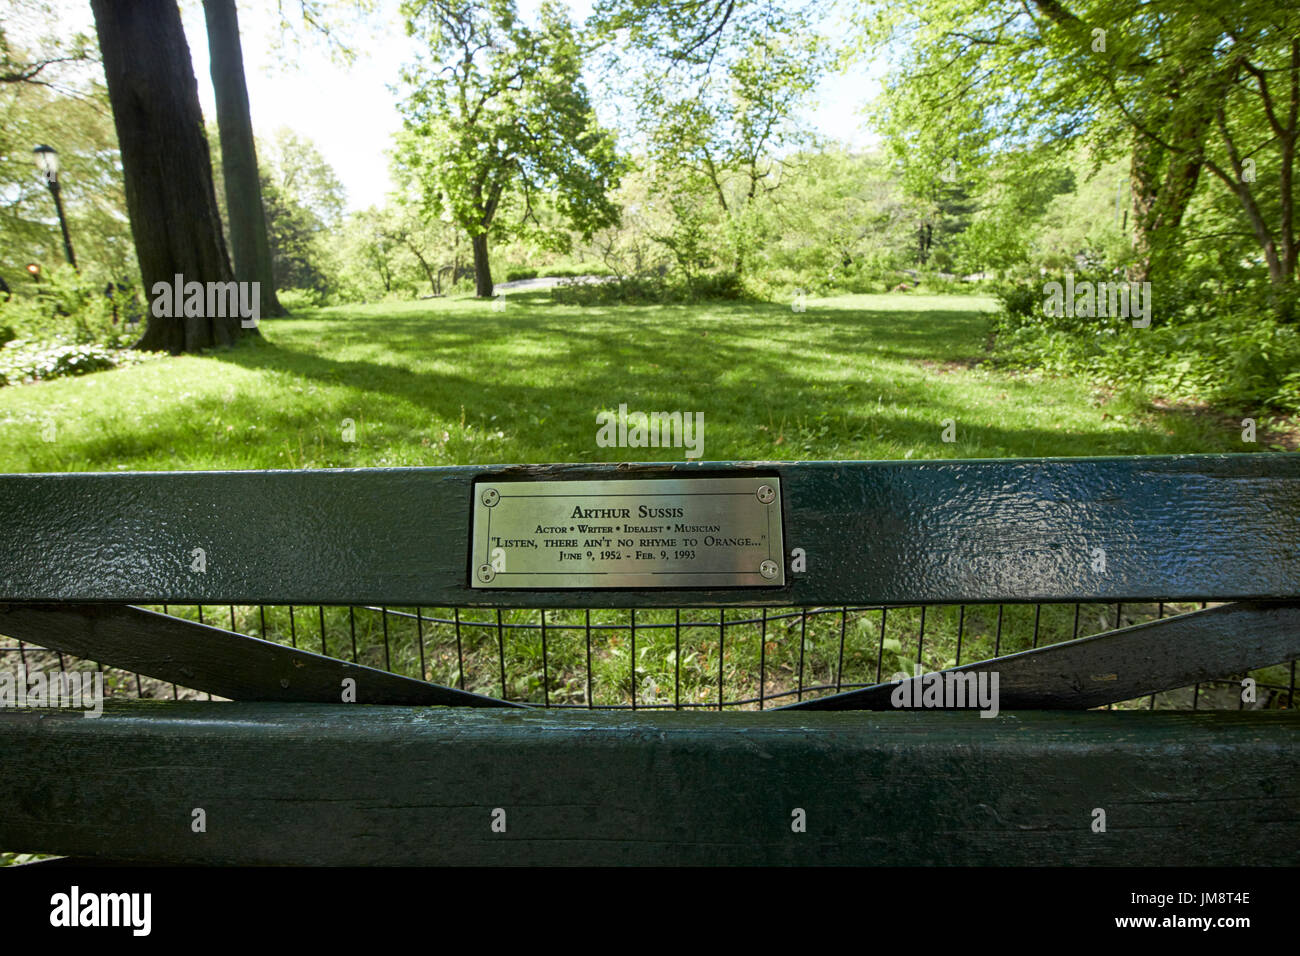 park bench in central park dedicated to arthur sussis New York City USA Stock Photo